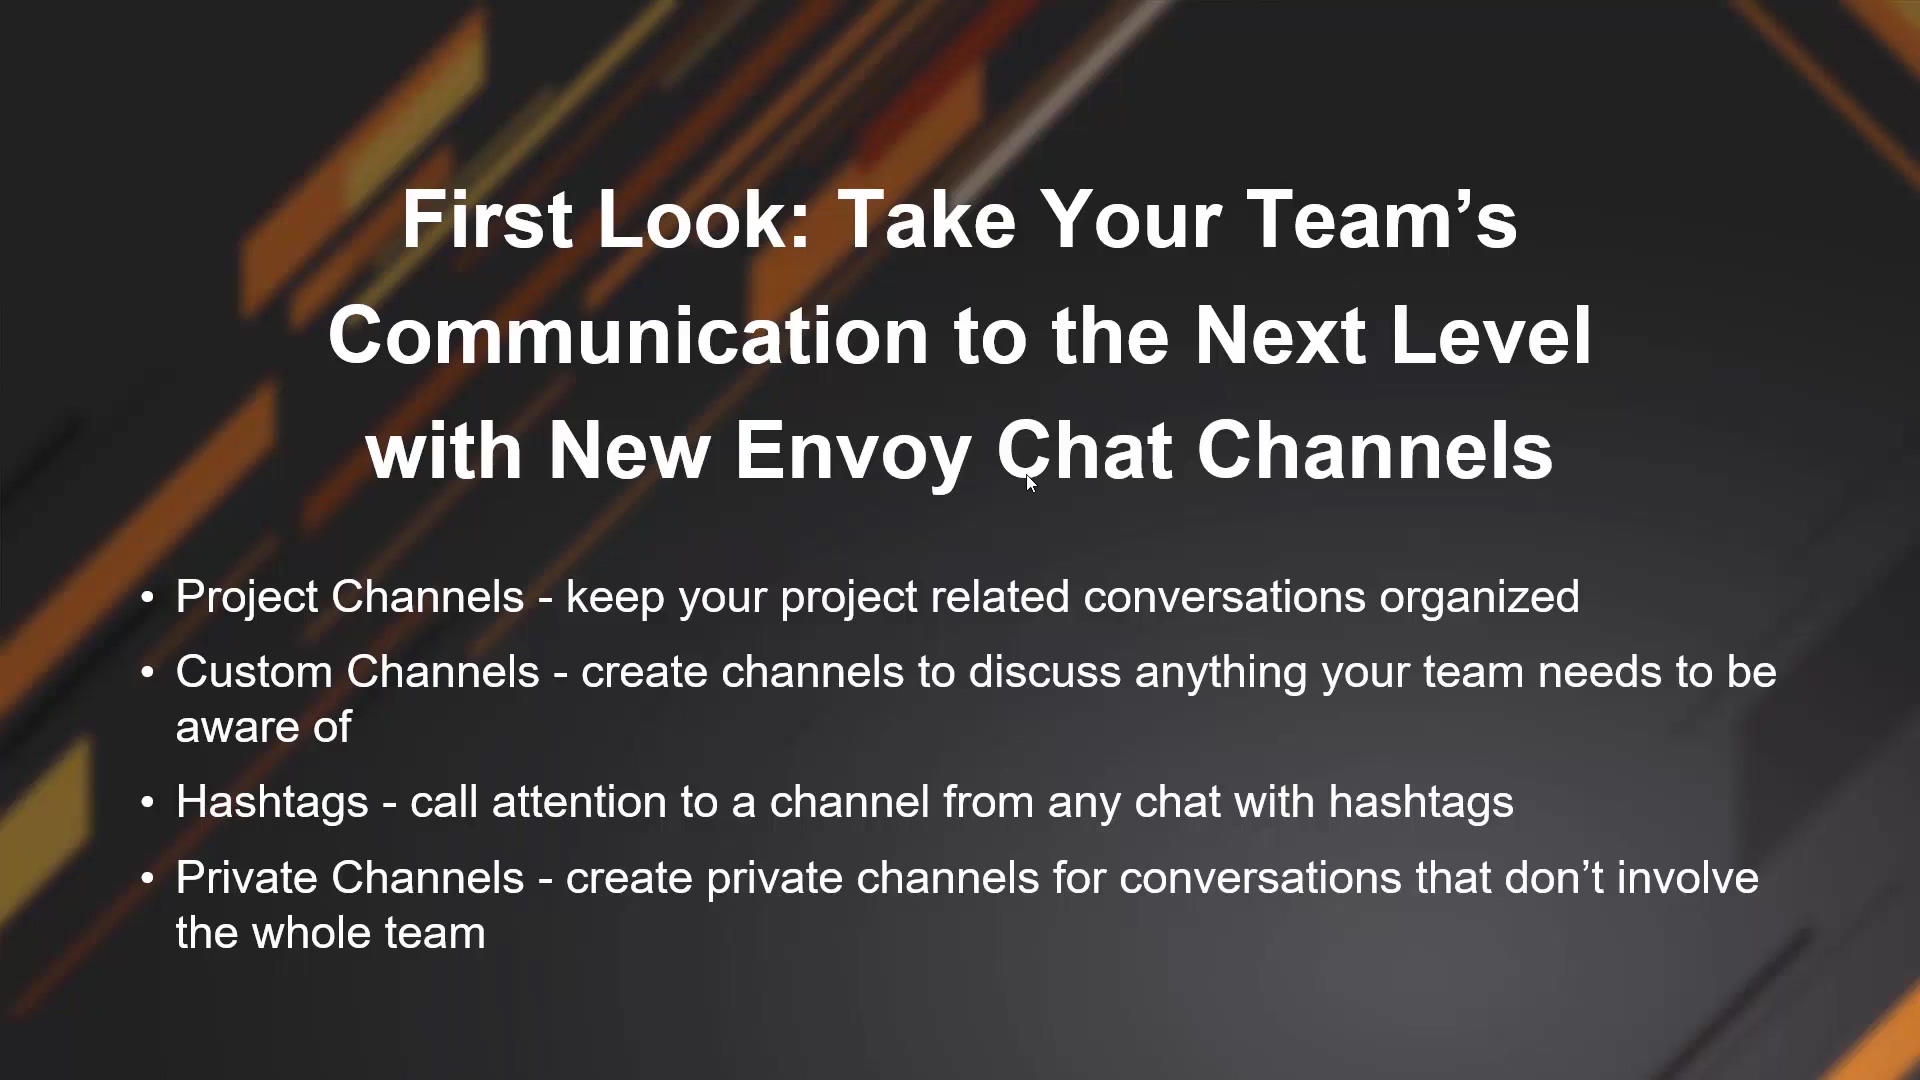 First Look - Take Your Team’s Communication to the Next Level with New Envoy Chat Channels_2